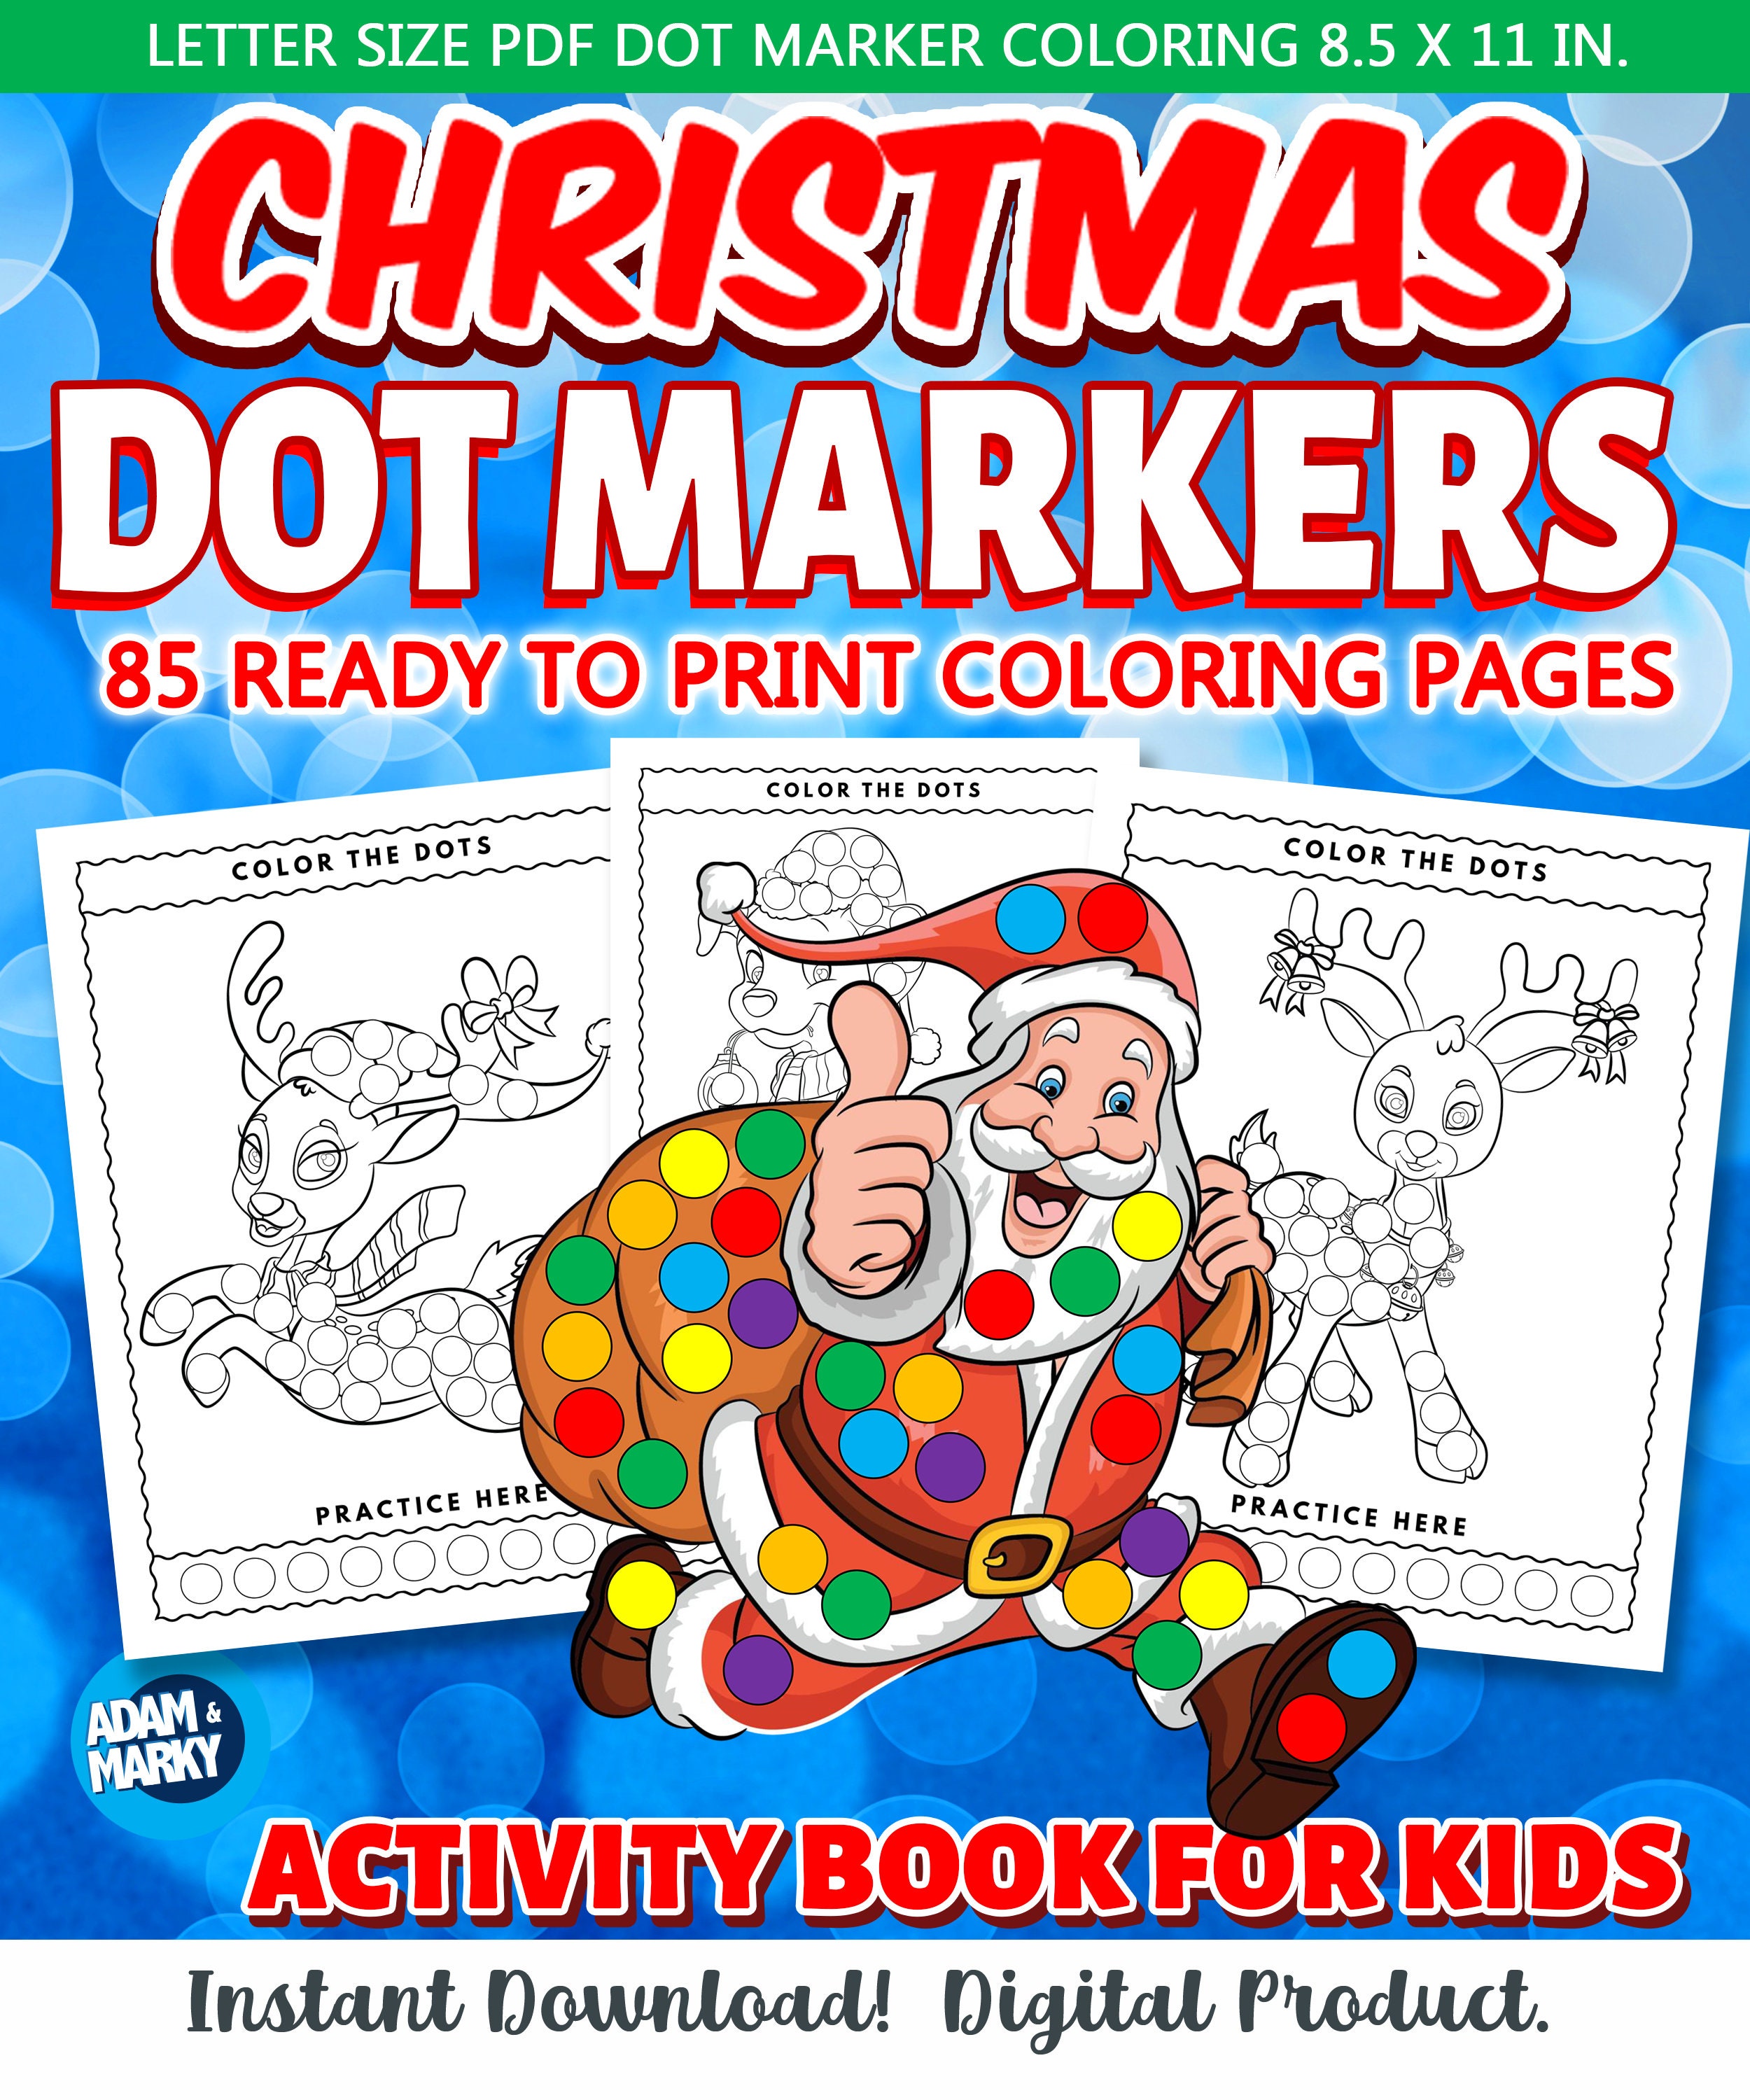 Dot Markers Activity Book Animals : Big Book Of Dot Markers With Easy  Guided Big Dots Activity Book For Toddlers, Kindergarteners, Preschool   1-3, 2-4, 3-5 With 2 Animals For Each Letter (Paperback) 